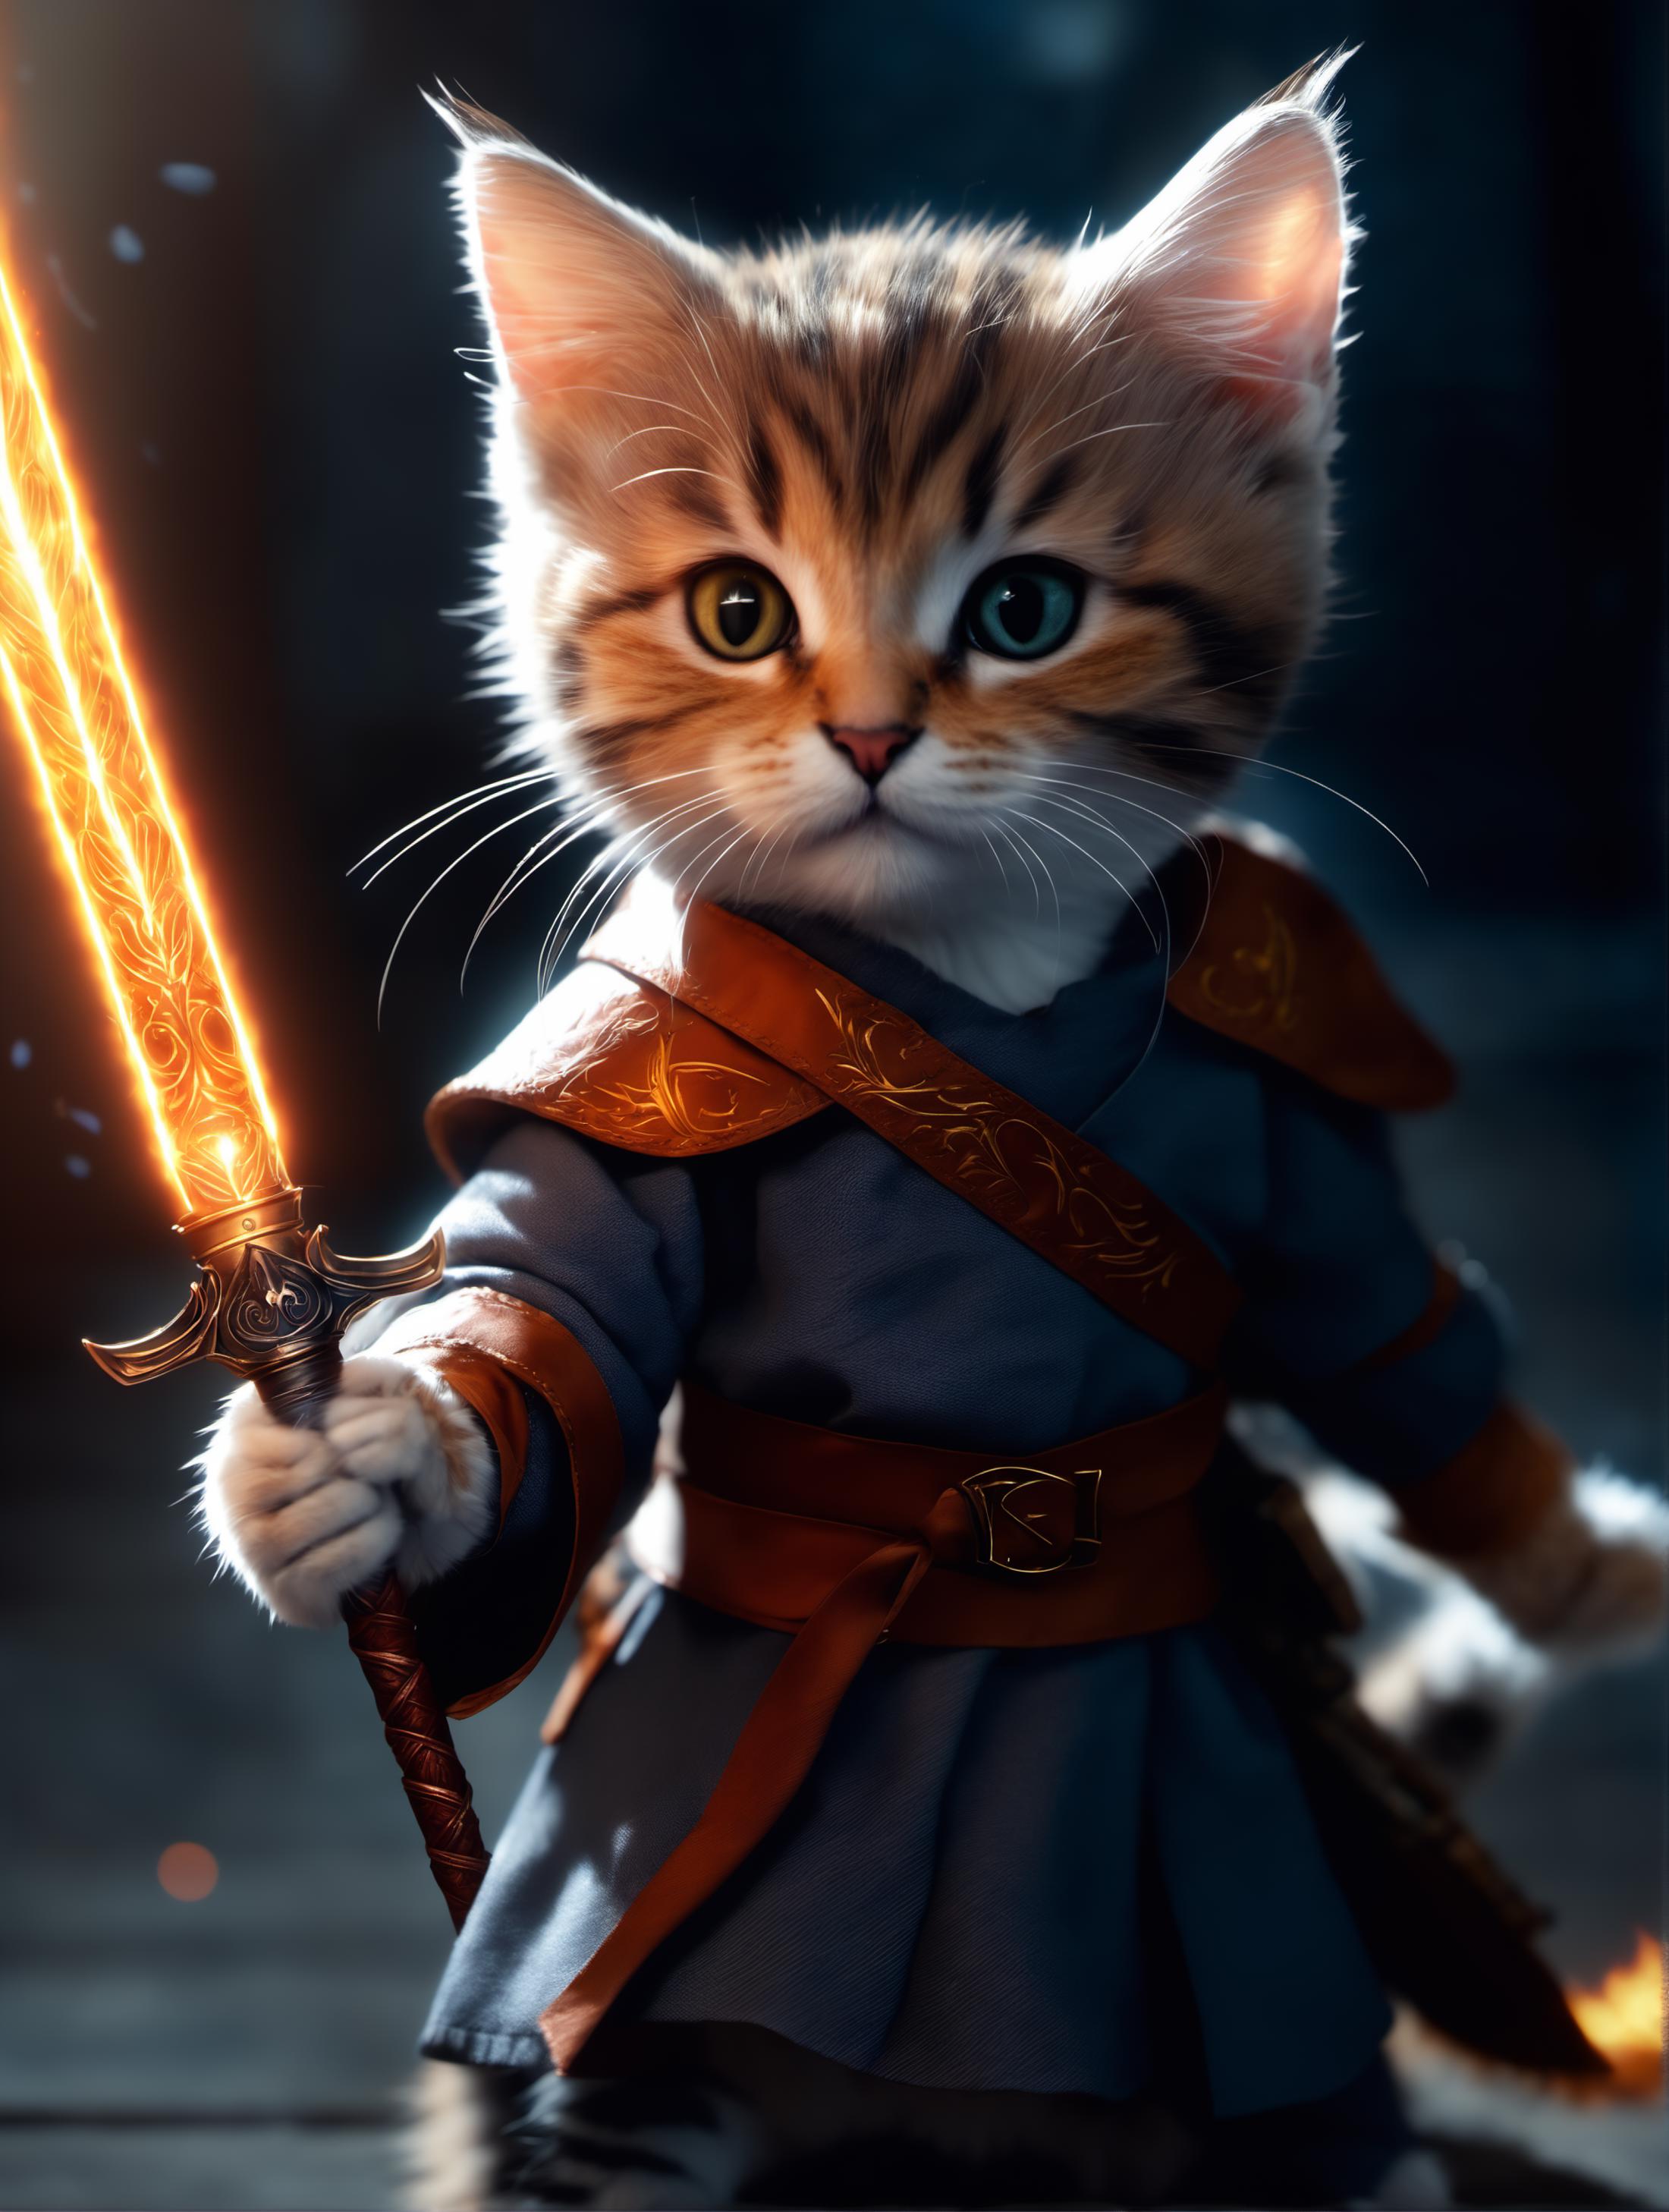 A cartoon cat with a sword in its paw, standing in front of a wall.